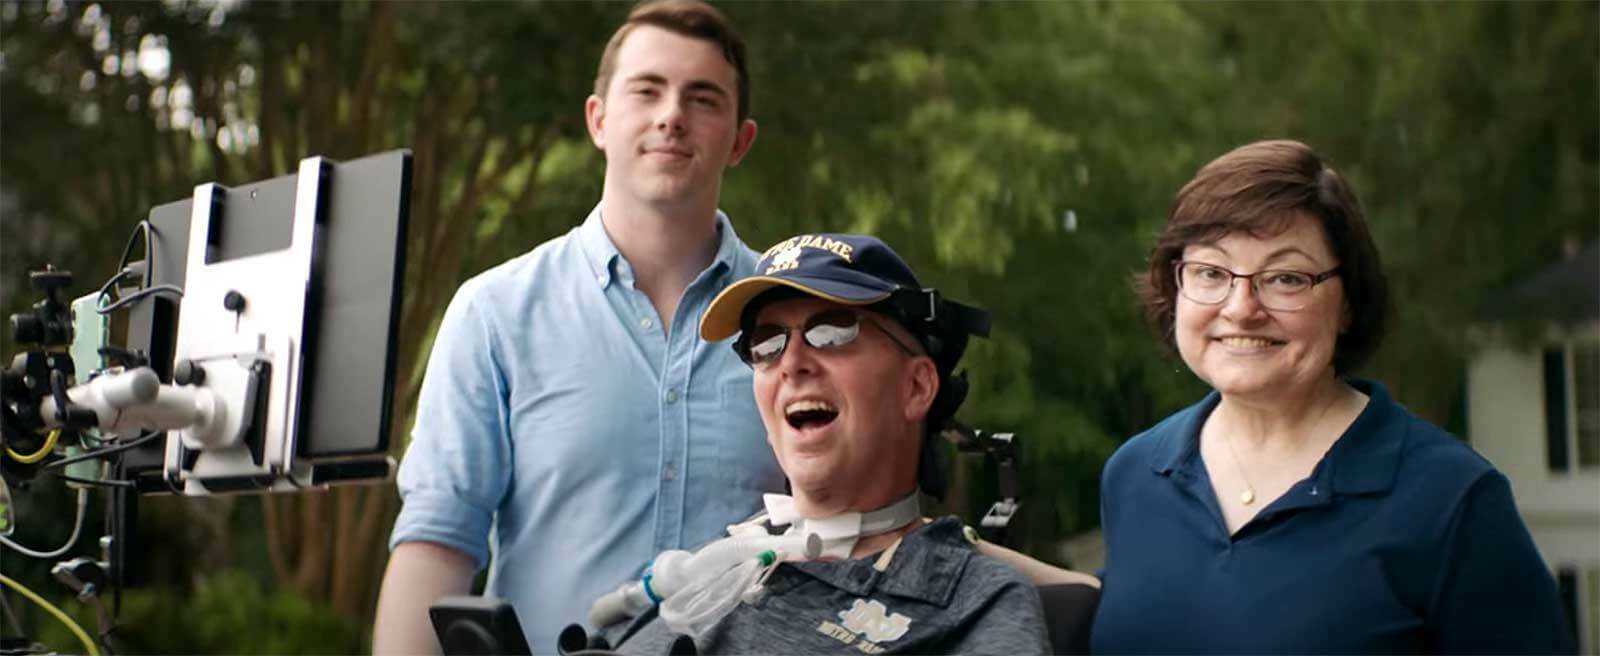 Two men and a woman are outside, blurred trees in the background. One man is in a wheelchair and the other two stand next to him.